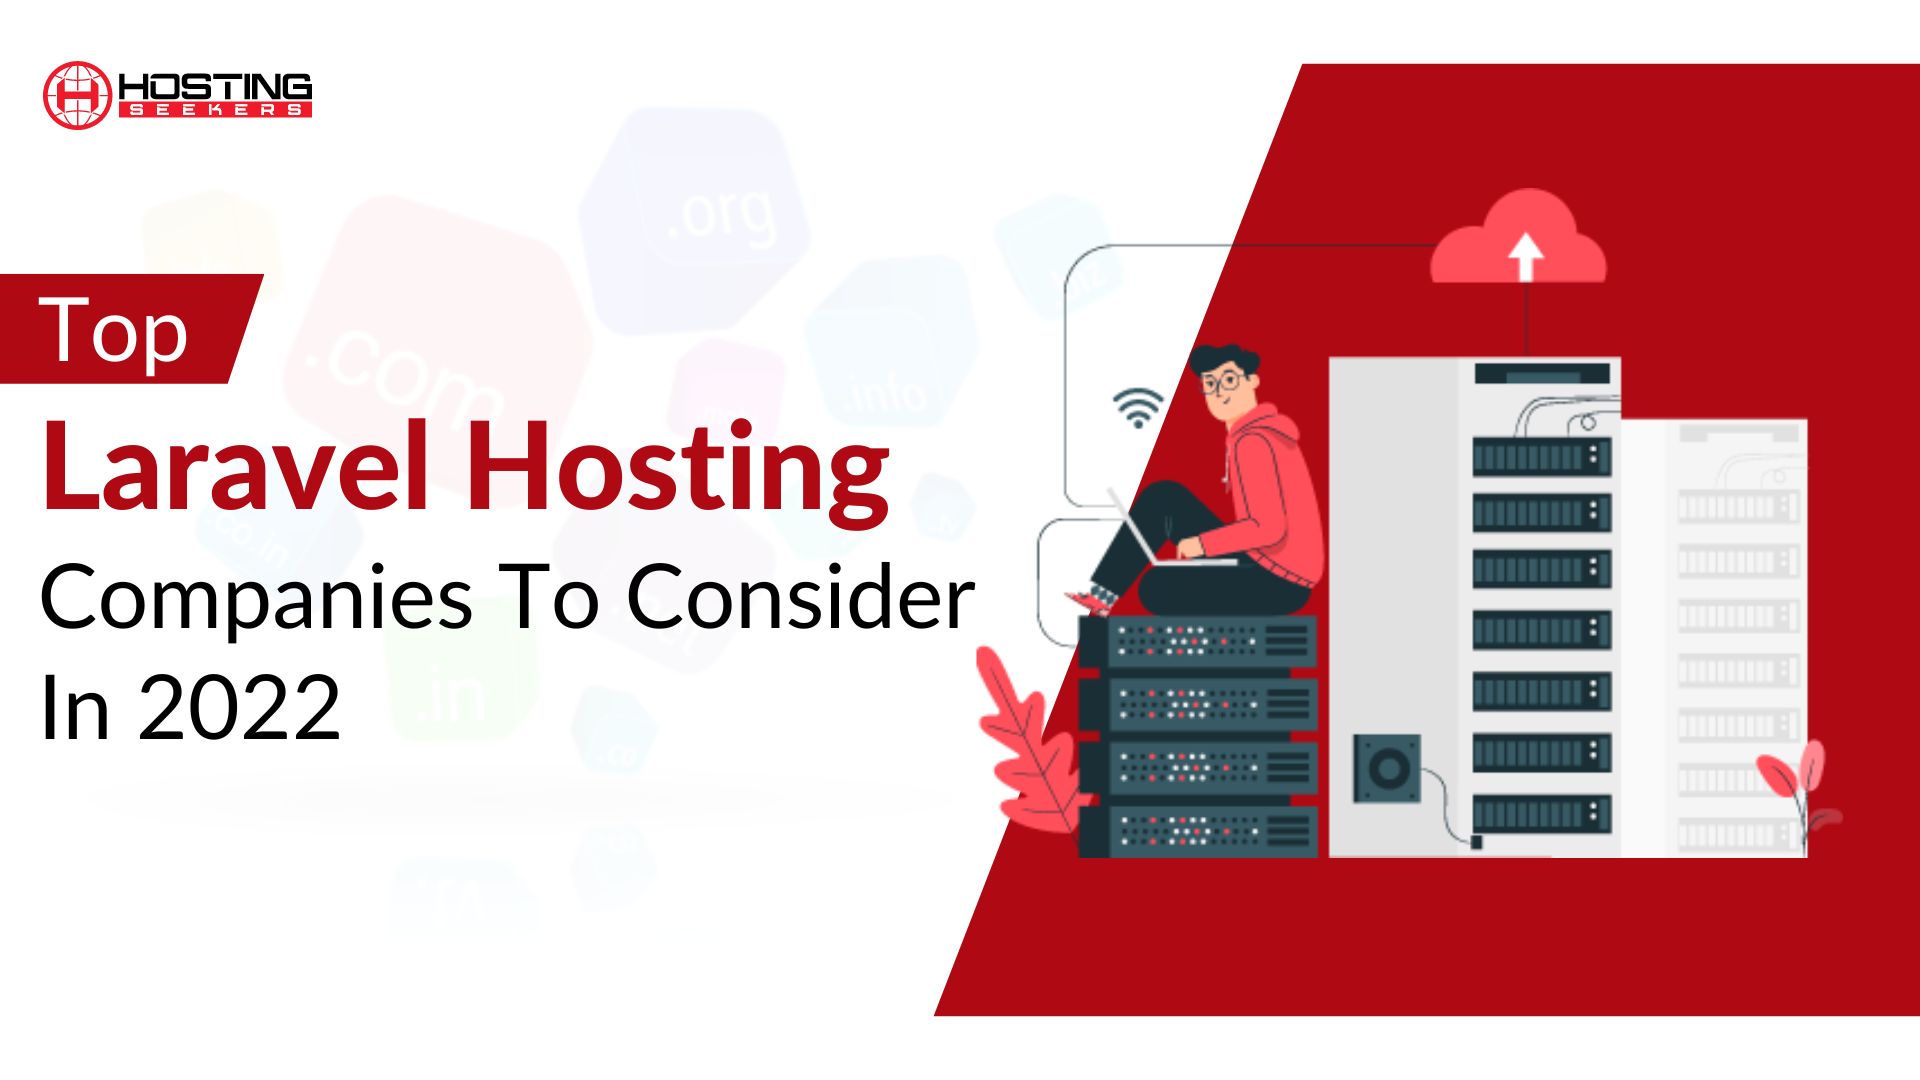 Top Laravel Hosting Companies To Consider In 2022